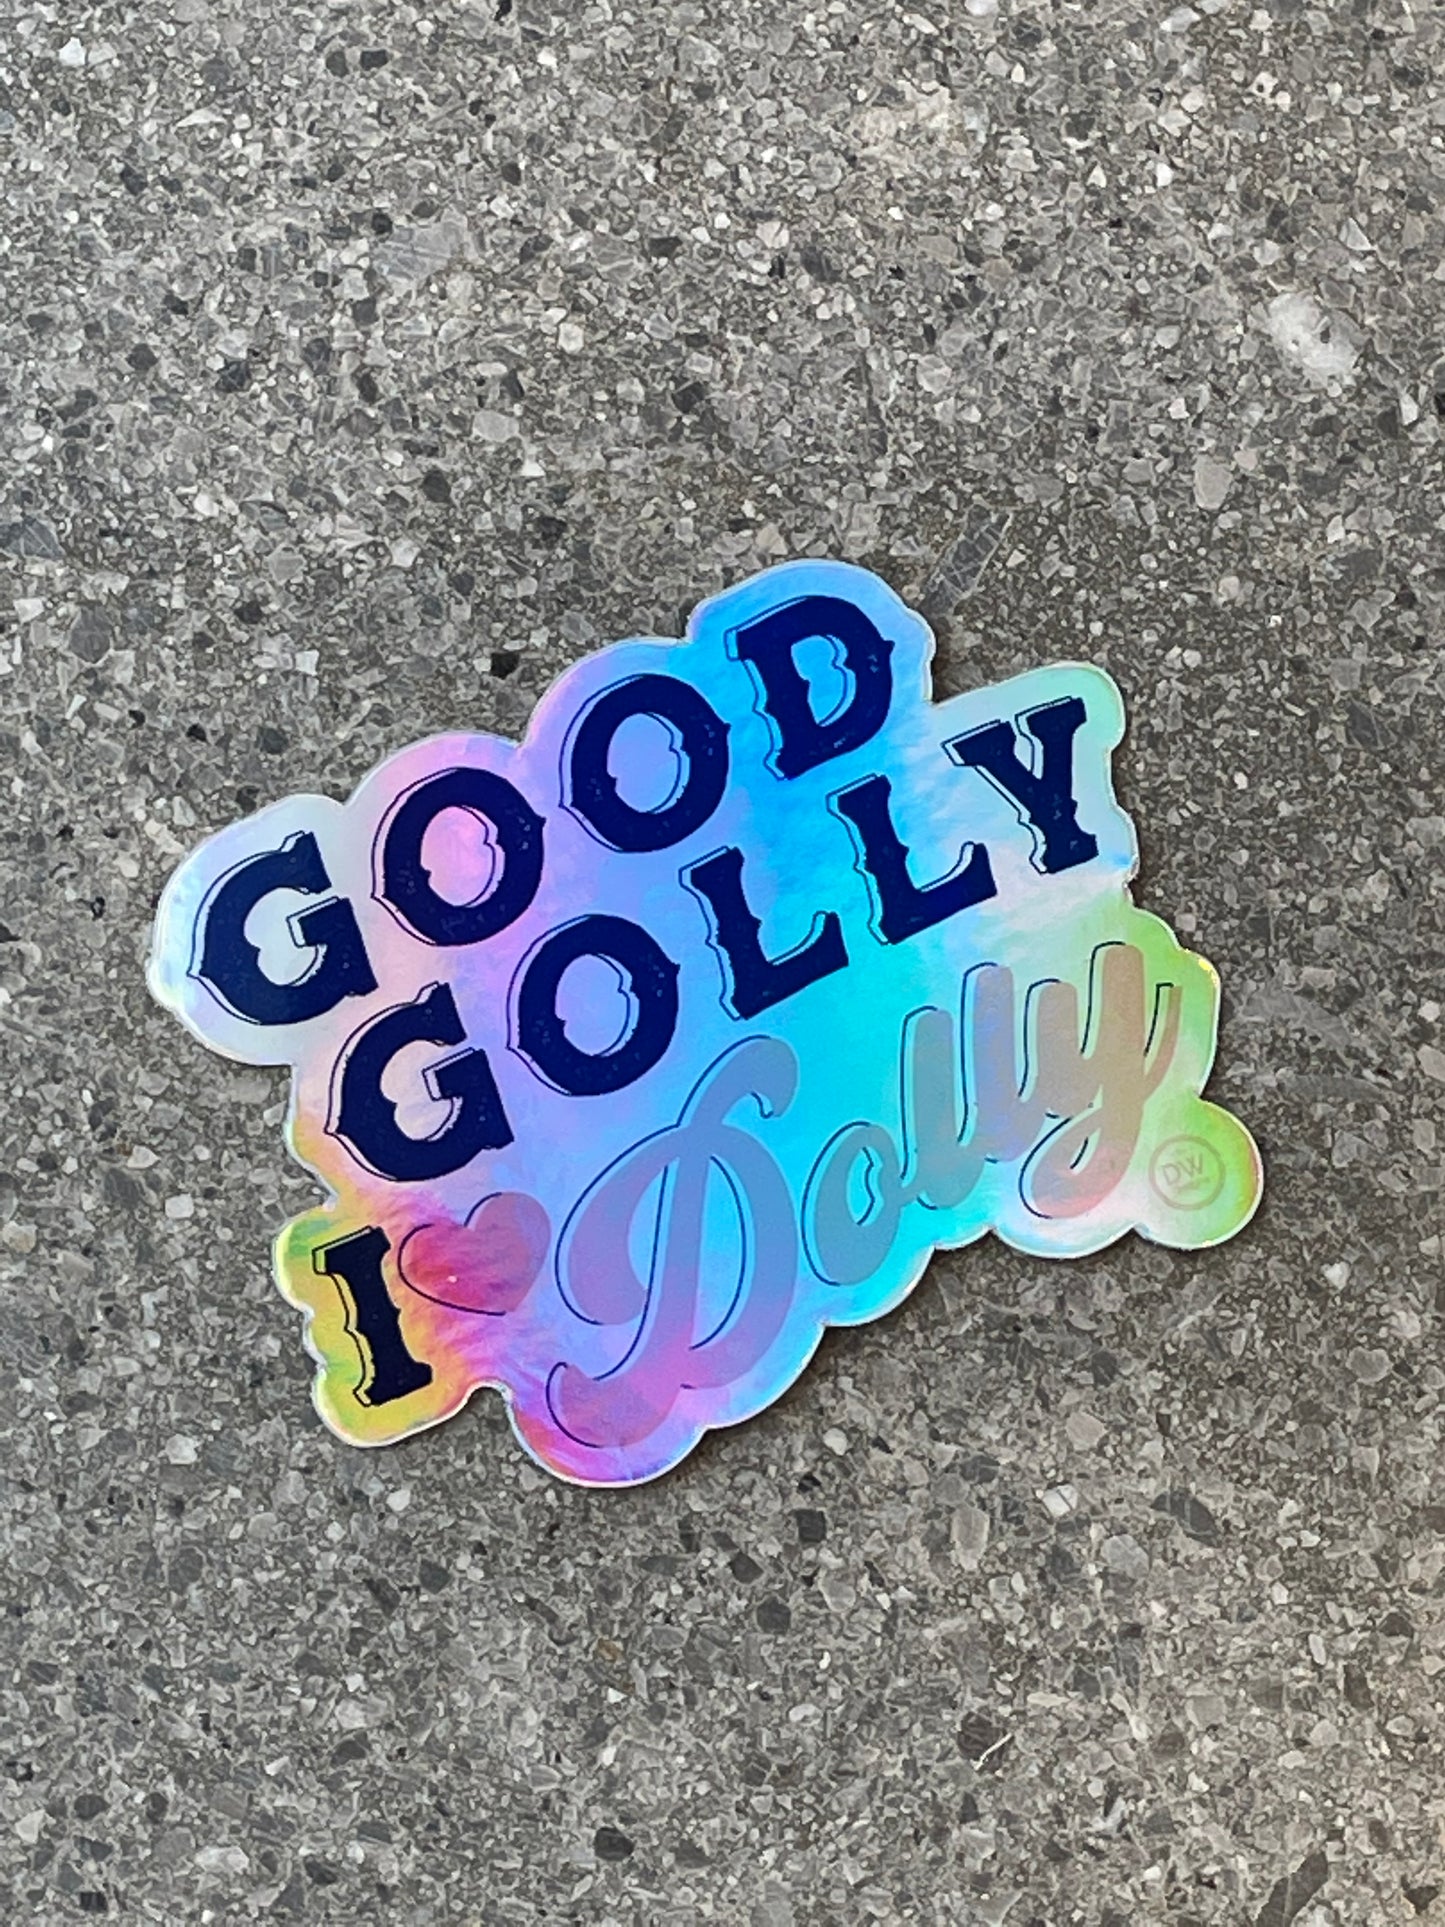 The Golly Dolly Holographic Sticker